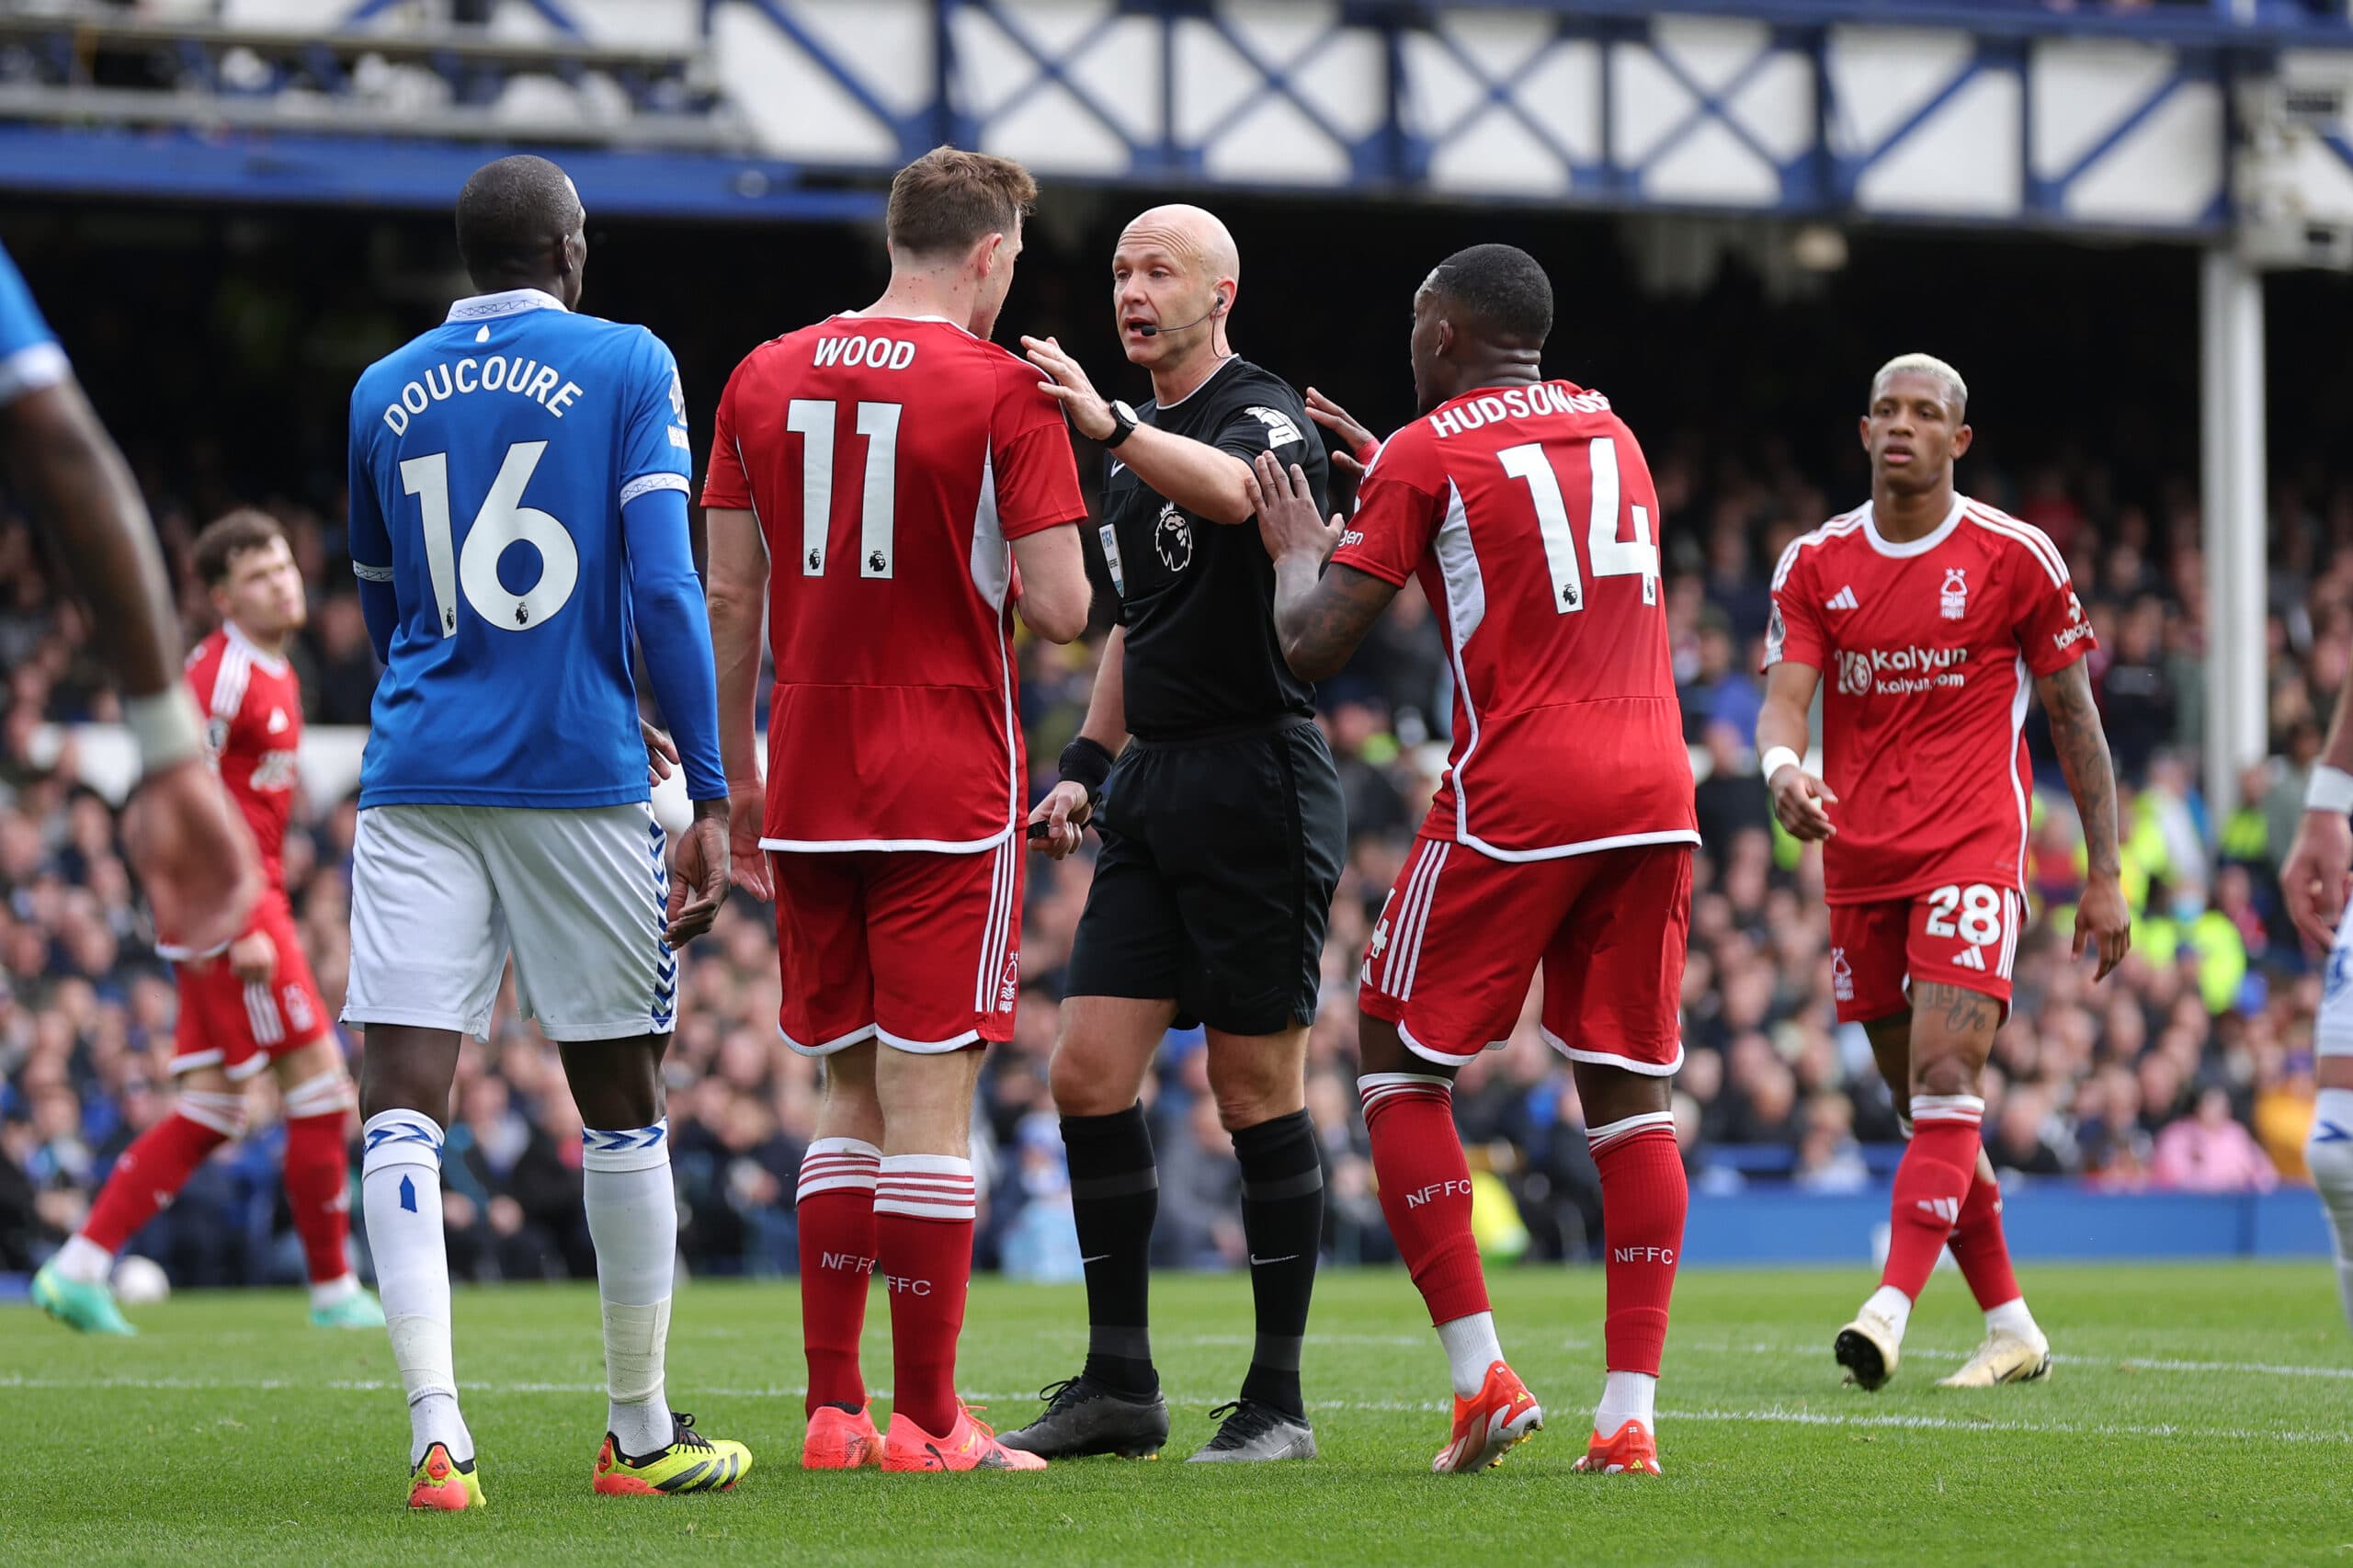 Nottingham Forest launch legal action against Sky Sports over Gary Neville’s comments after statement criticizing referees